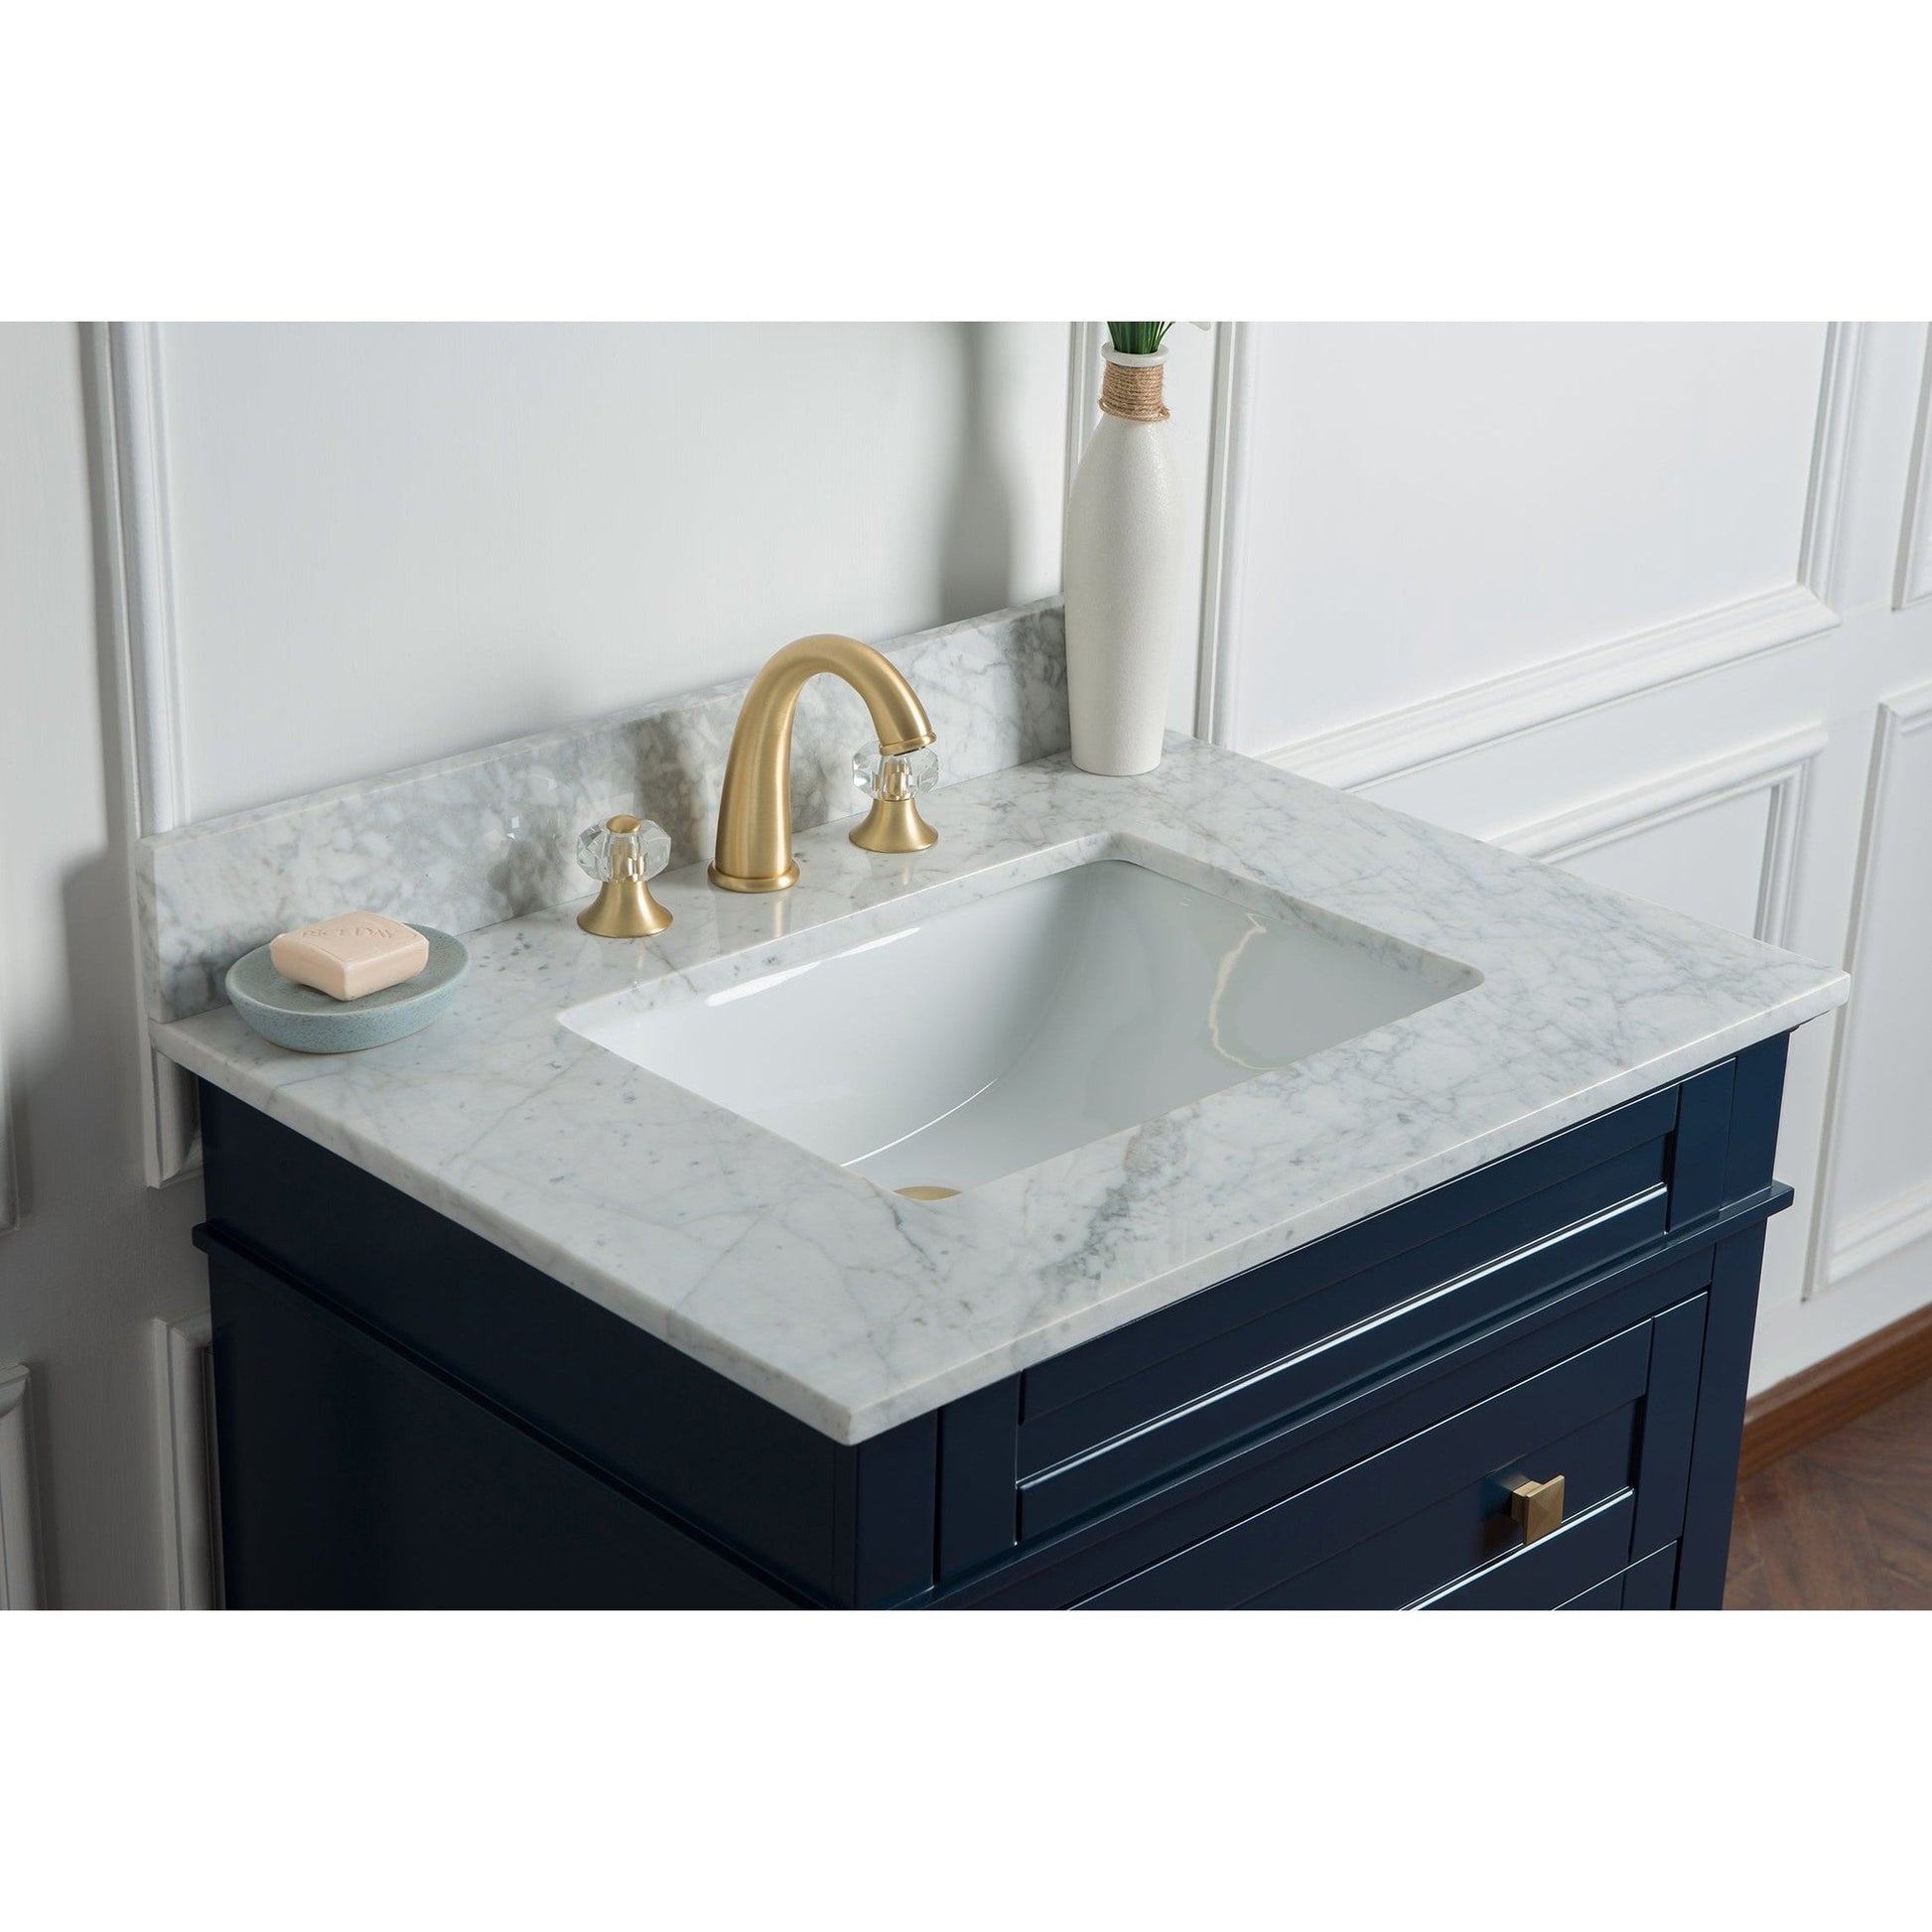 Legion Furniture 30" Navy Blue Freestanding Vanity With Carrara White Marble Top and White Ceramic Sink